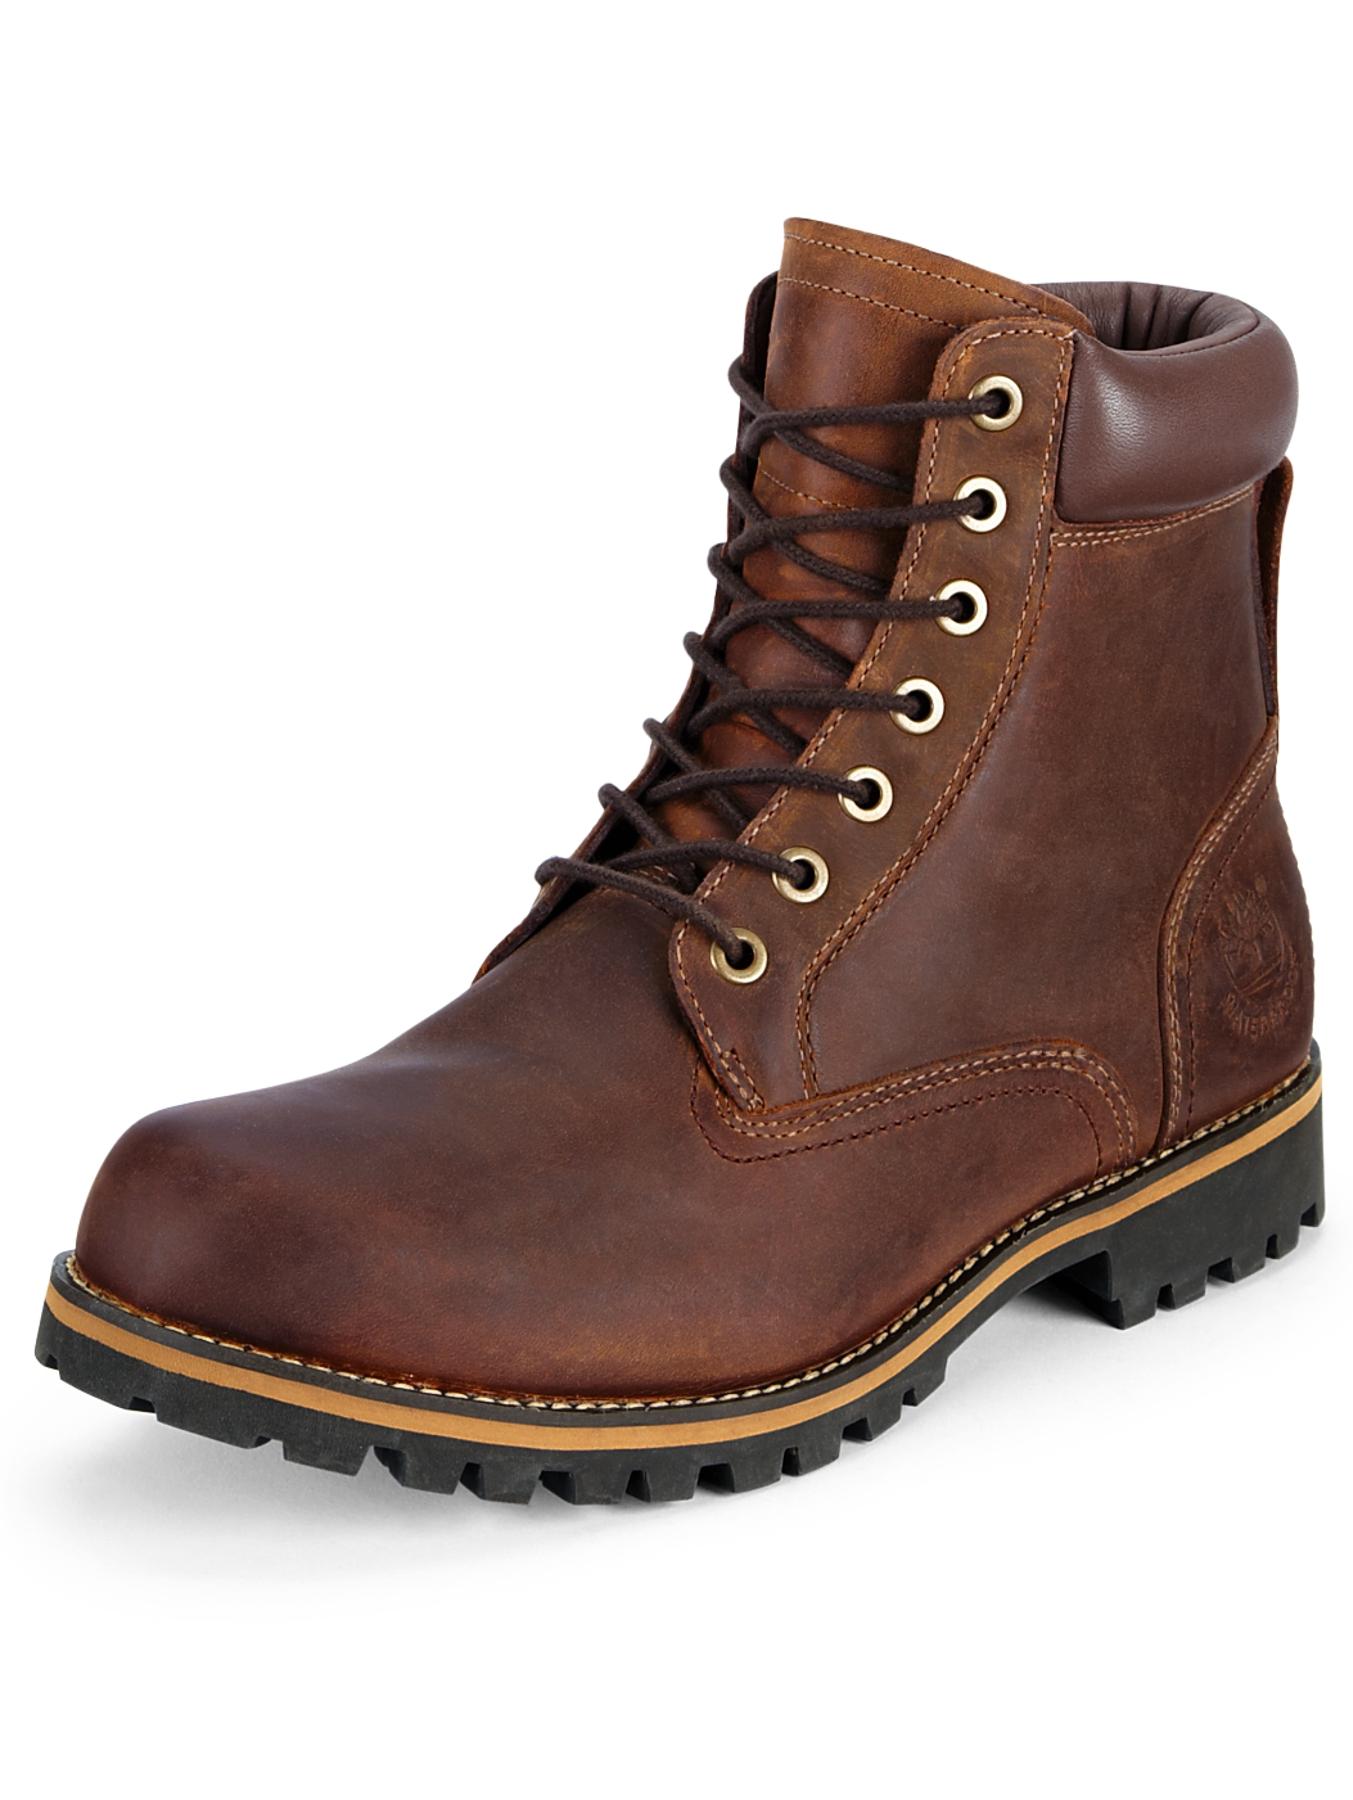 Earthkeepers 6 inch Mens Boots copper roughcut